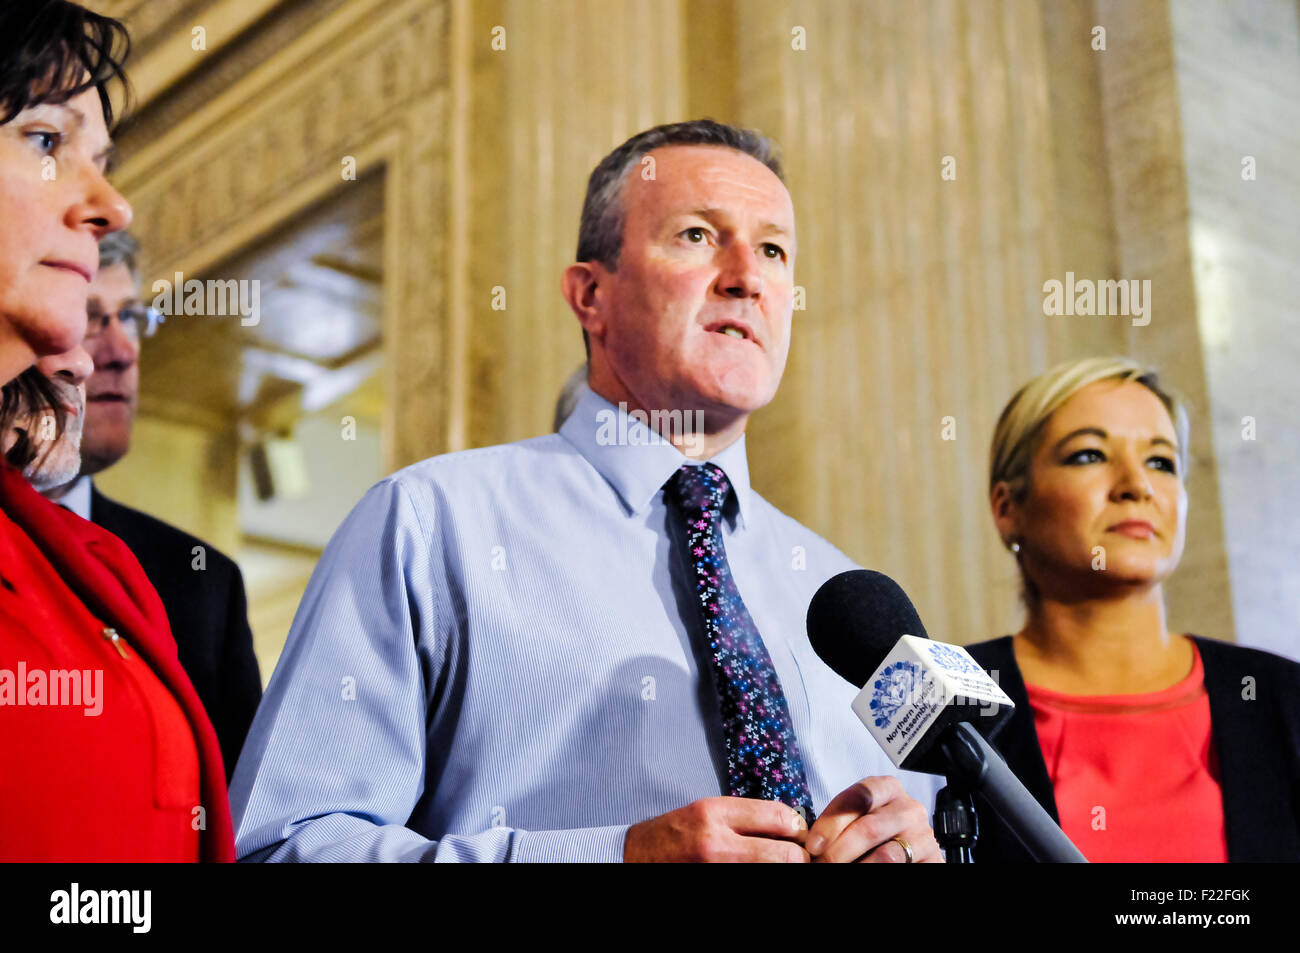 Belfast, Northern Ireland, UK. 10th September, 2015.  Conor Murphy from Sinn Fein calls on other political parties not to adjourn or suspend the Northern Ireland Assembly. Credit:  Stephen Barnes/Alamy Live News. Stock Photo